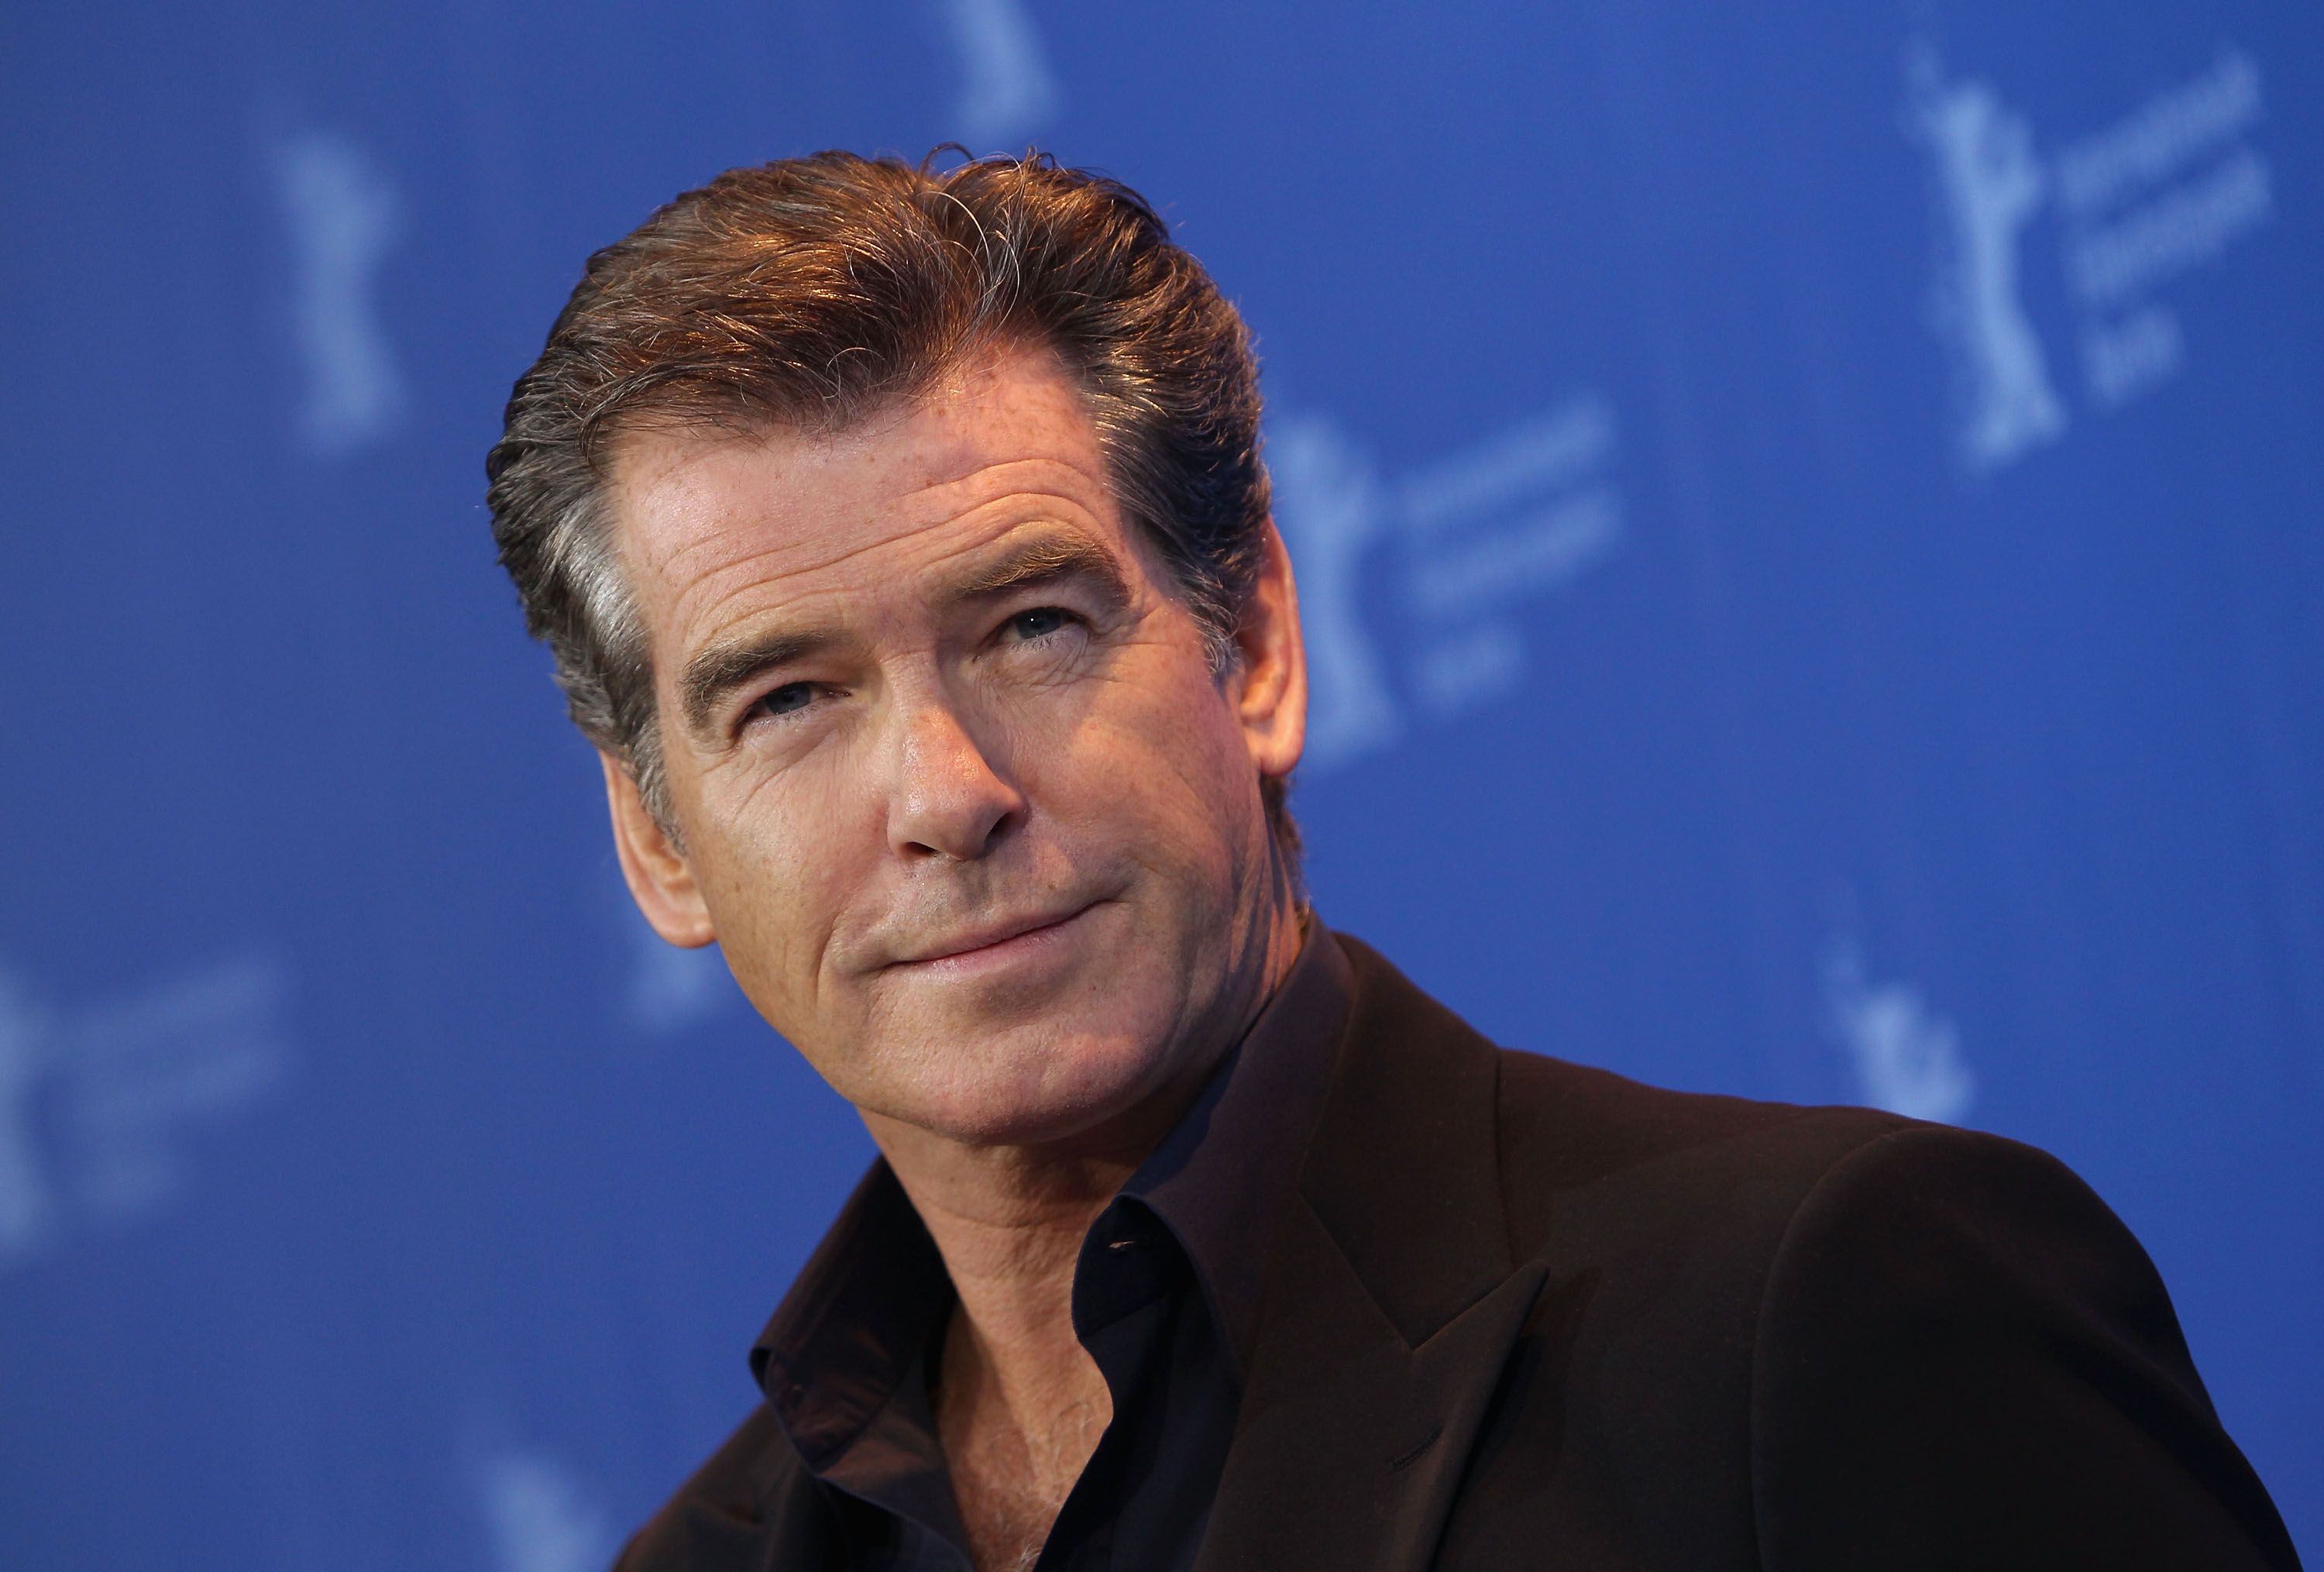 Pierce Brosnan at the 60th Berlin International Film Festival in 2010 | Source: Getty Images